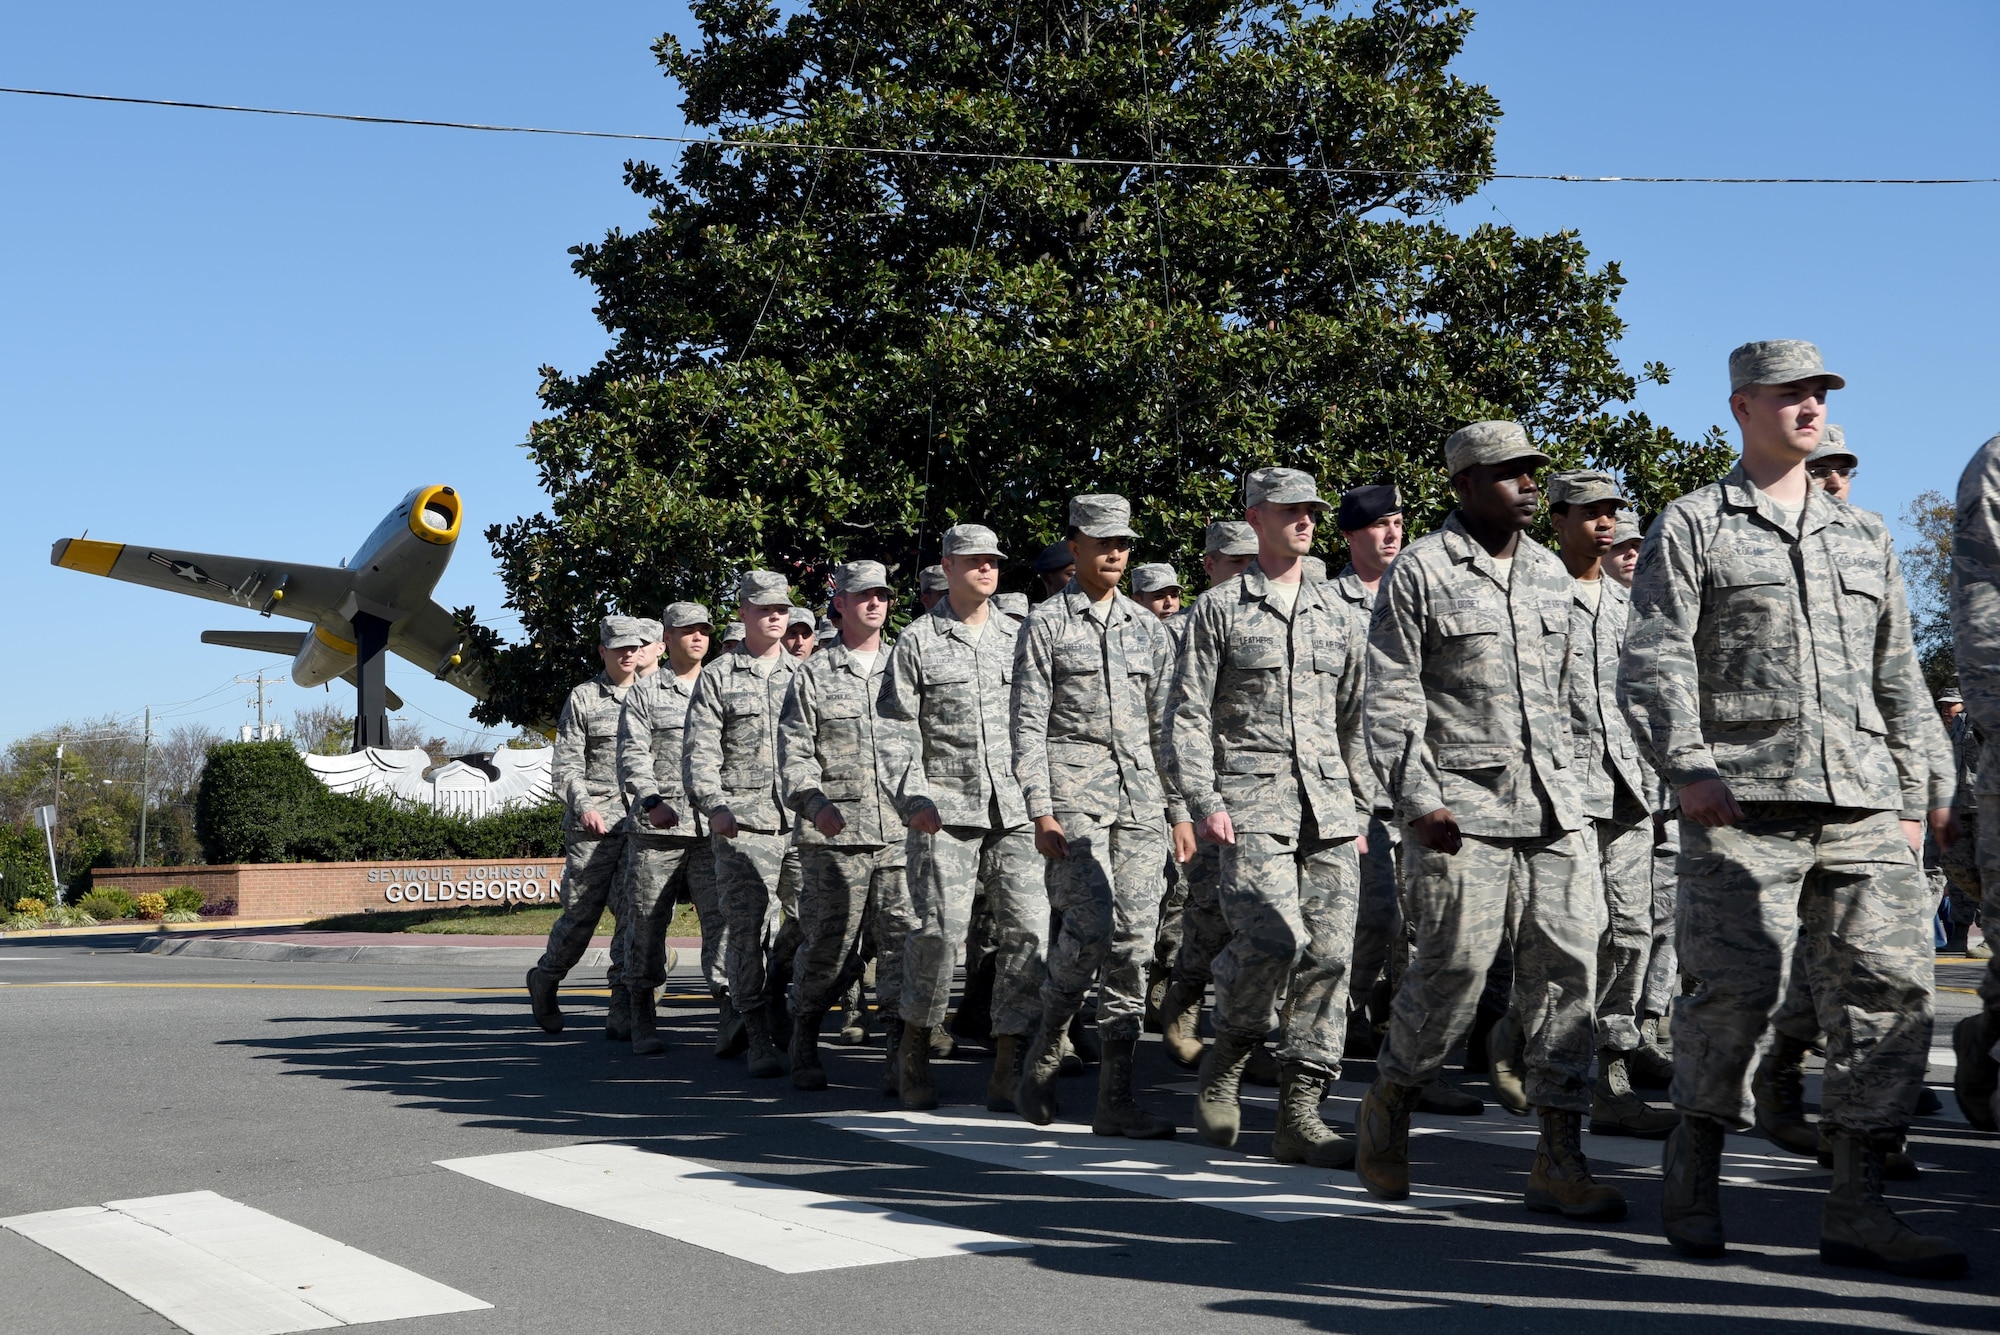 Team Seymour Airmen march in formation during the Wayne County Veterans Day parade, Nov. 11, 2016, in Goldsboro, North Carolina. An estimated 8,000 people attended the annual parade which featured a formation of more than 220 Airmen marching through the streets. (U.S. Air Force photo by Airman 1st Class Kenneth Boyton)